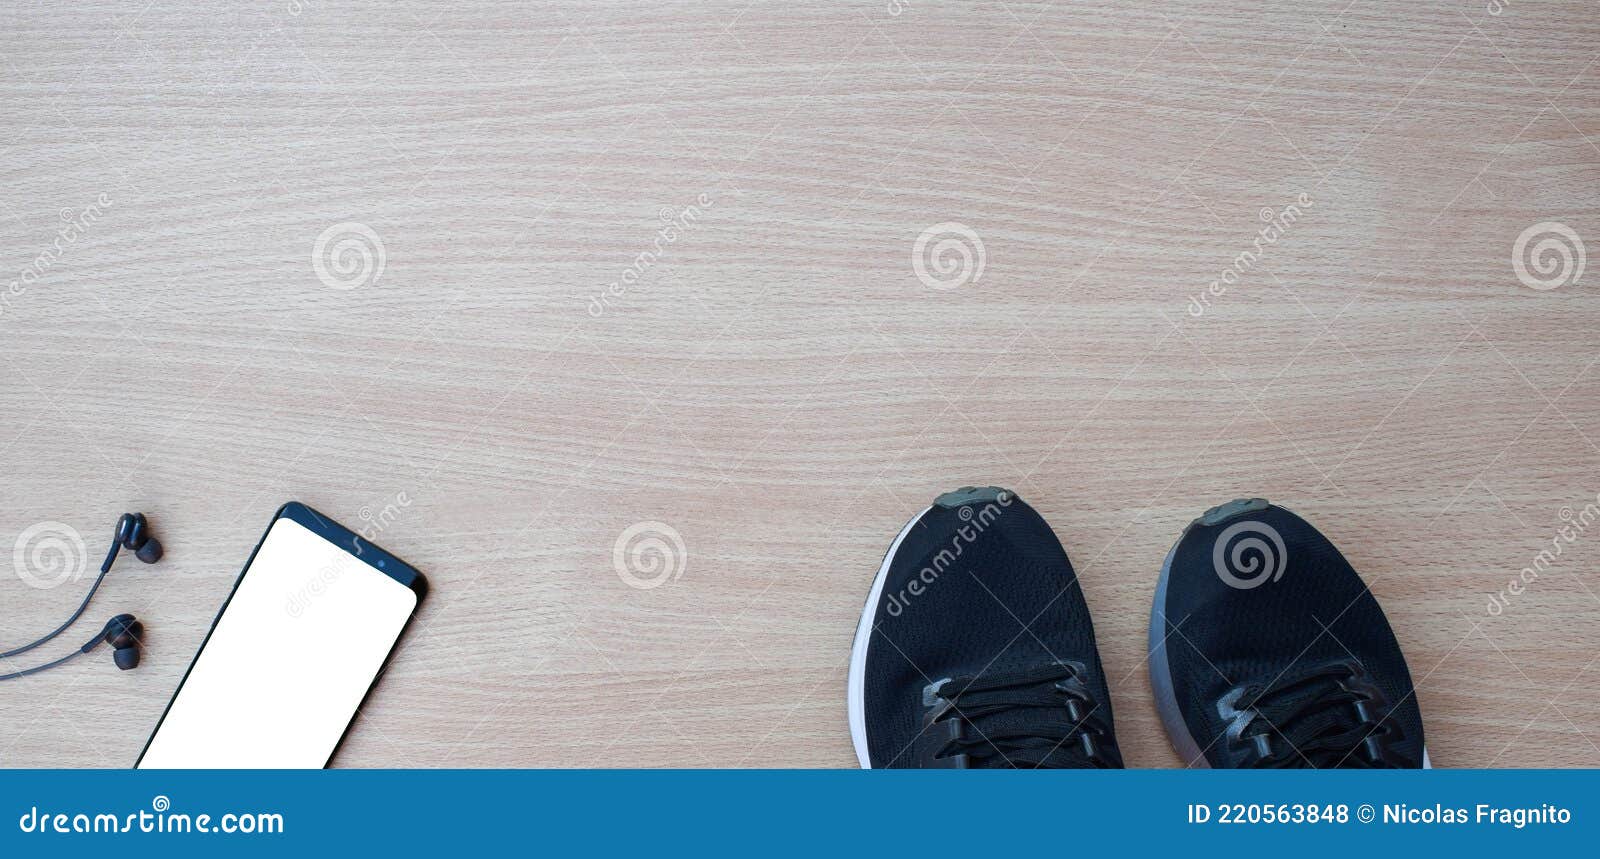 sports shoes with smartphone and headphones on wooden table